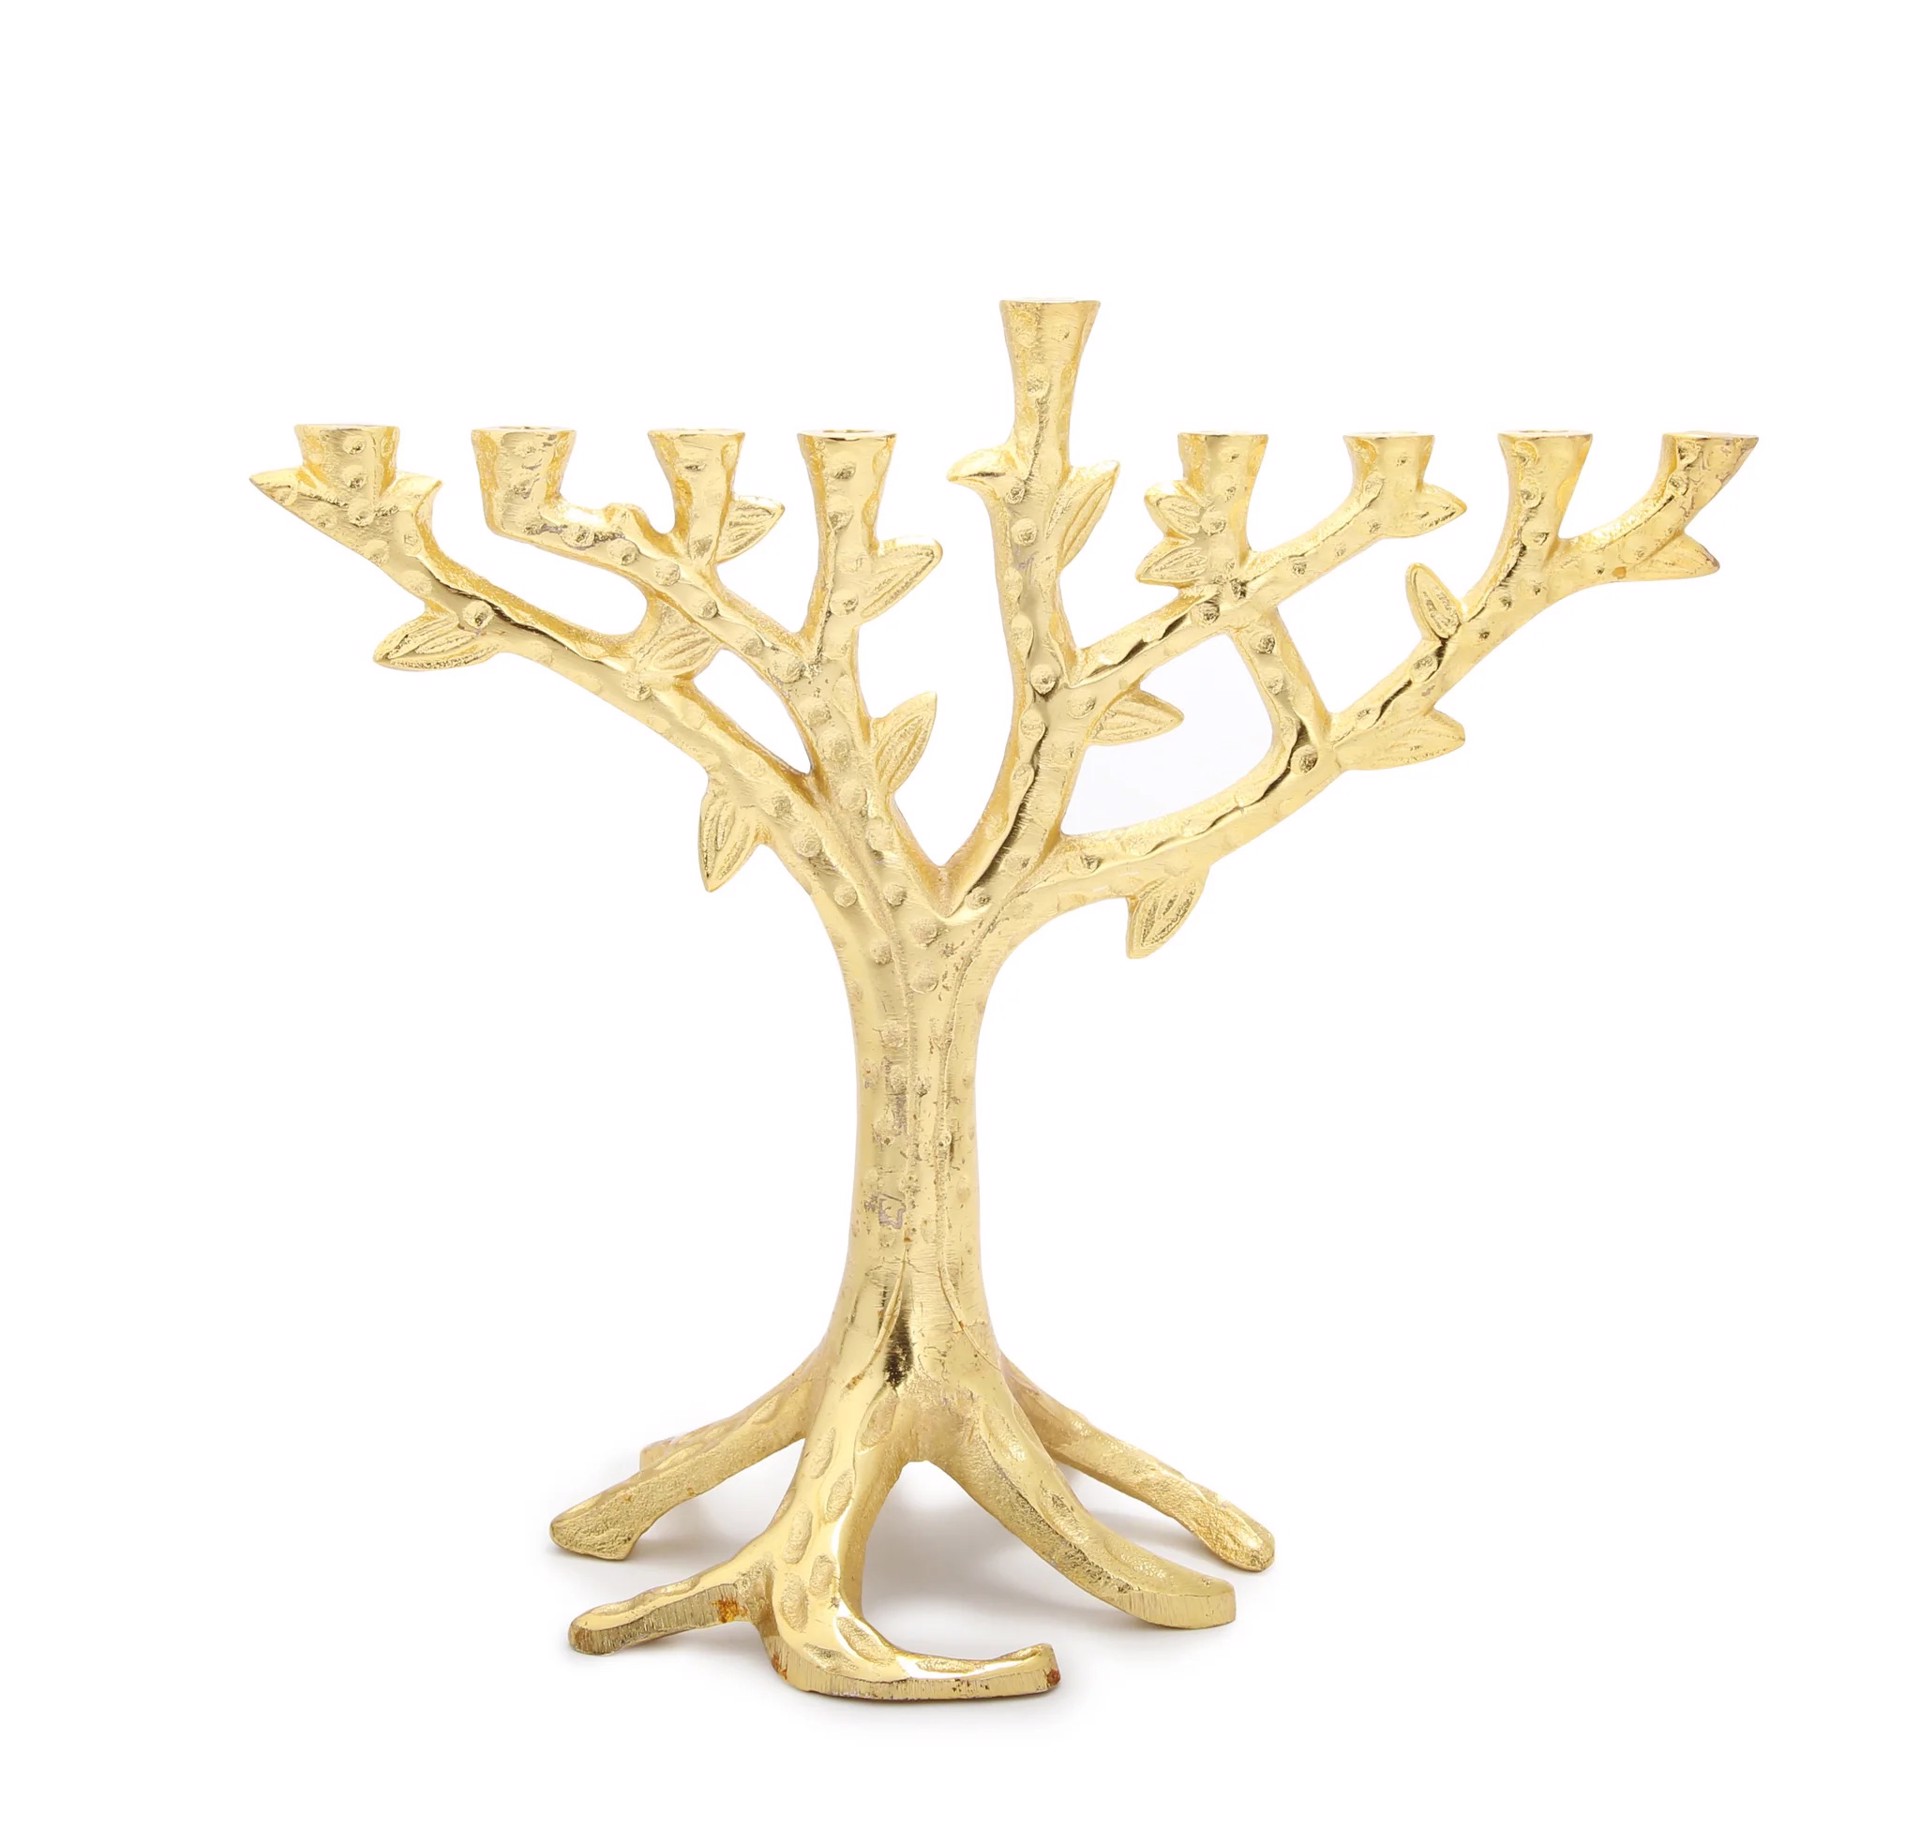 Gold Branch Menorah by Argent